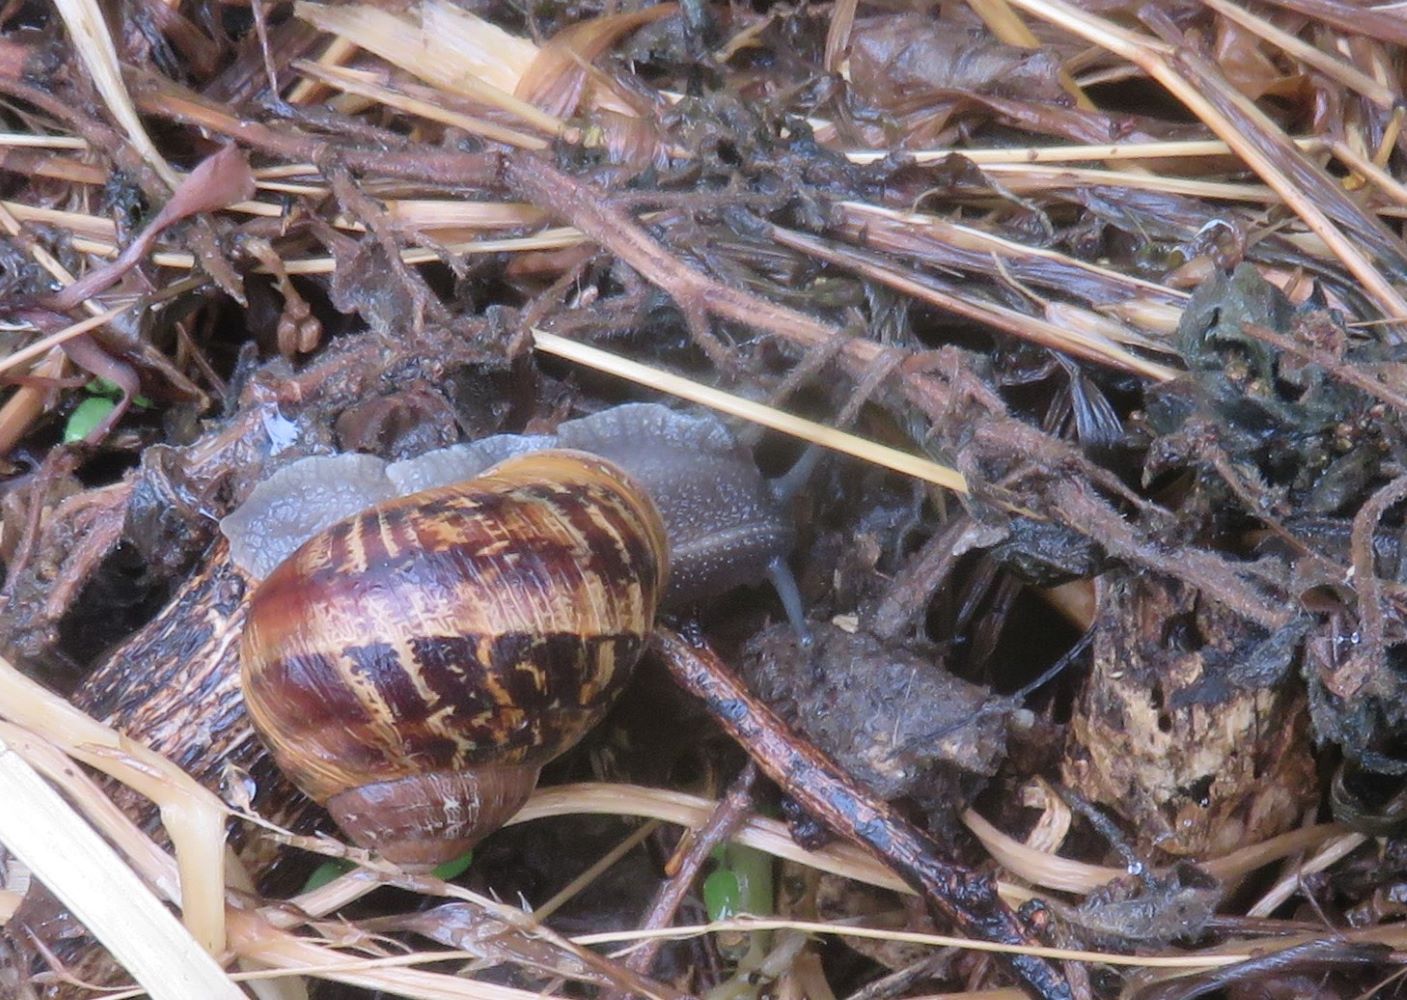 A snail doing what it loves, surrounded by its favorite food, slurping up microbial sludge with its raspy tongue.